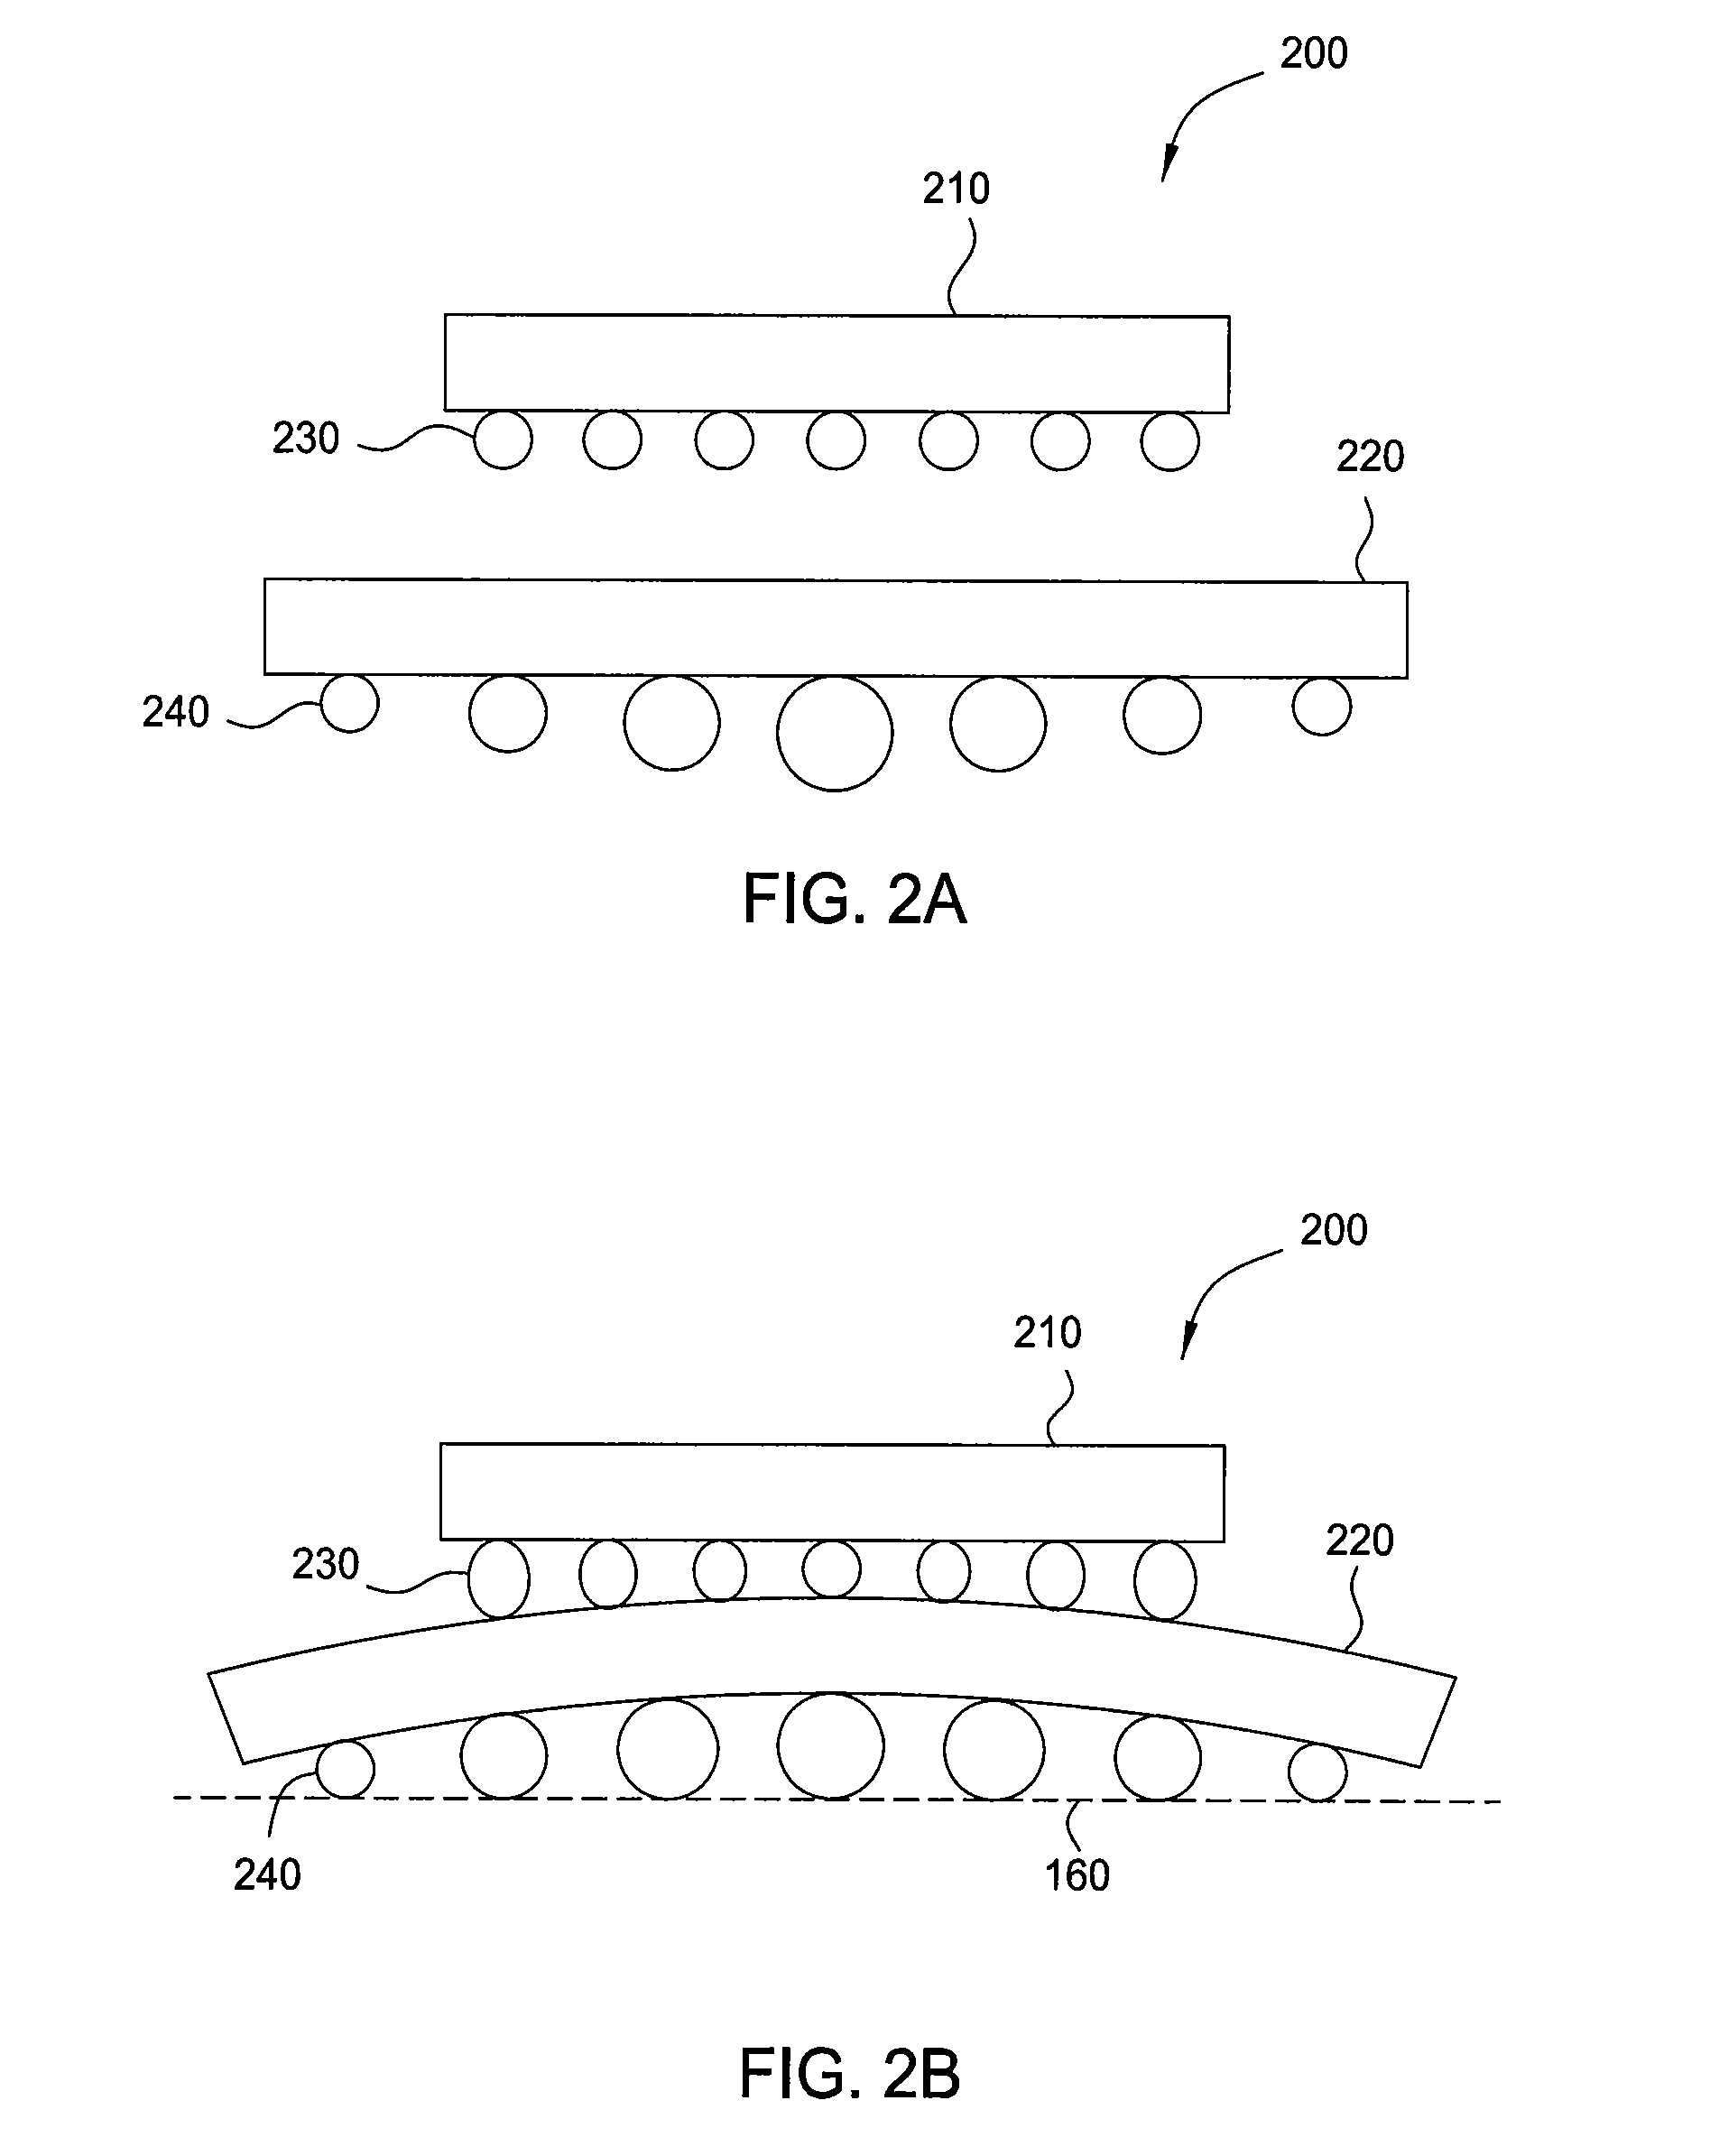 Variable-size solder bump structures for integrated circuit packaging